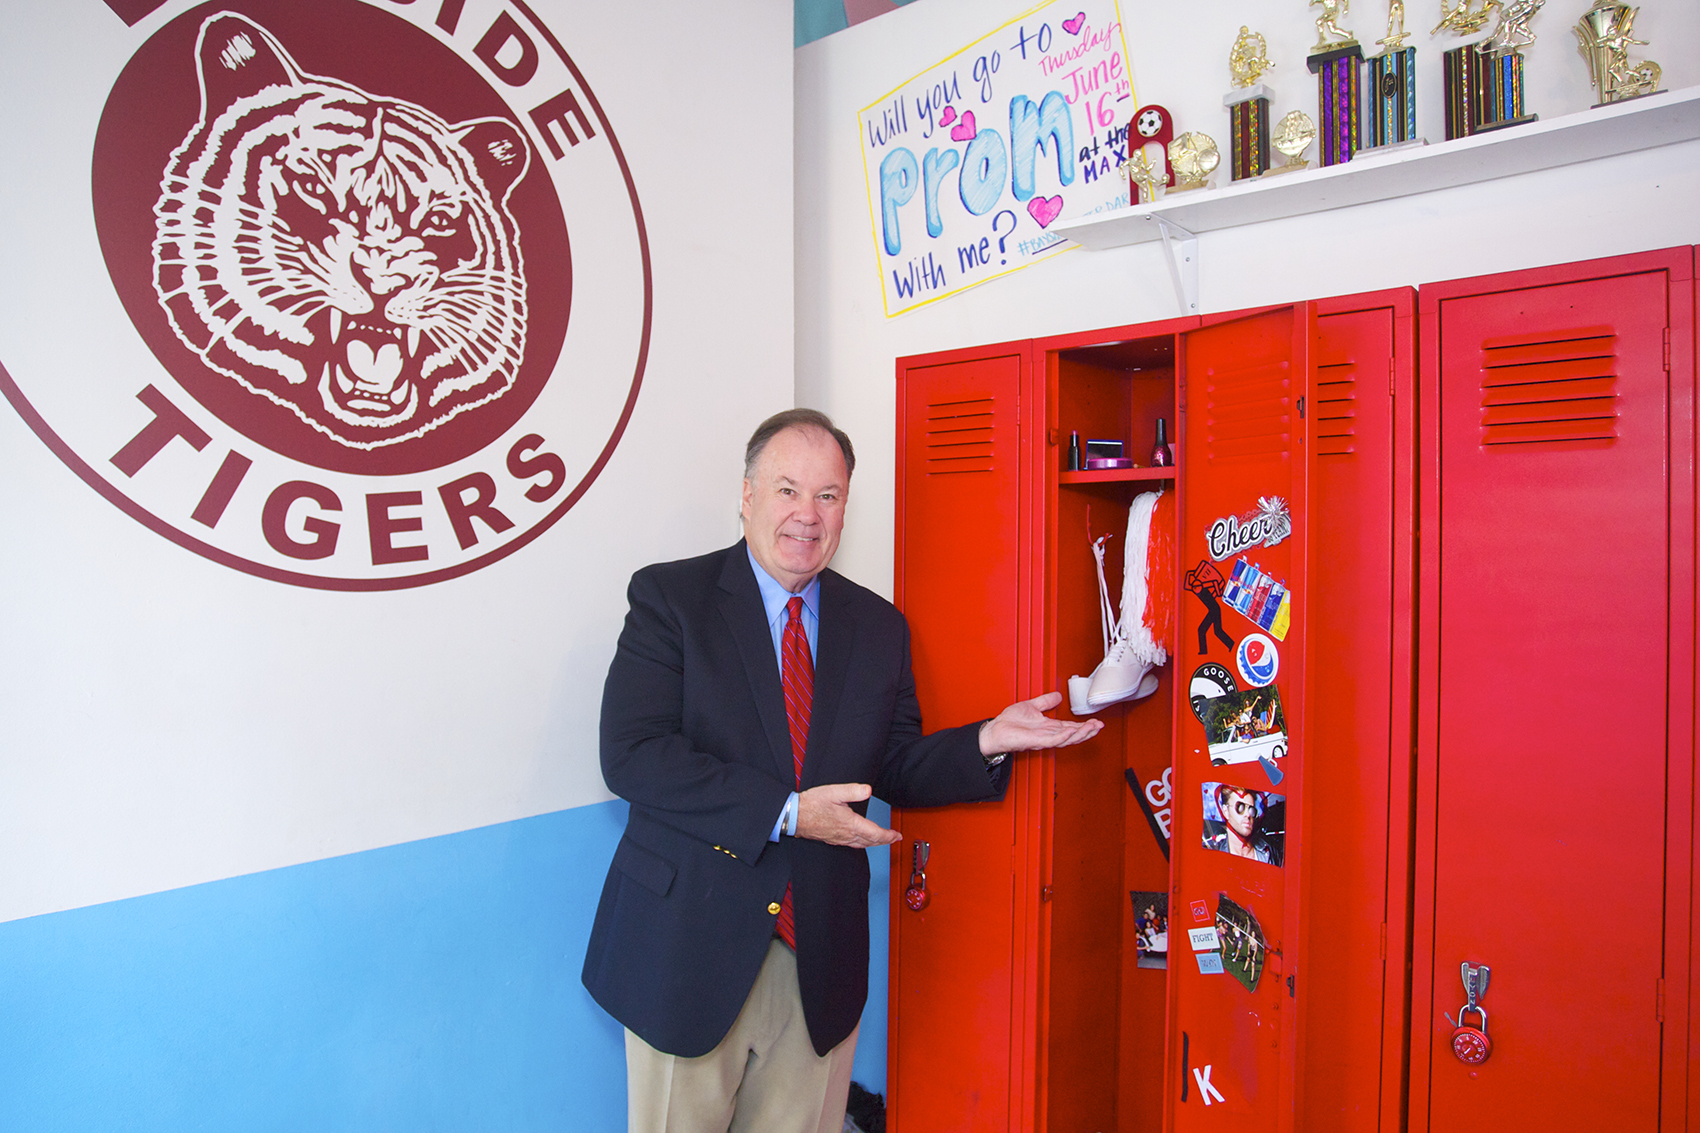 Walking the halls of Bayside High with Dennis Haskins - photo by David Miller